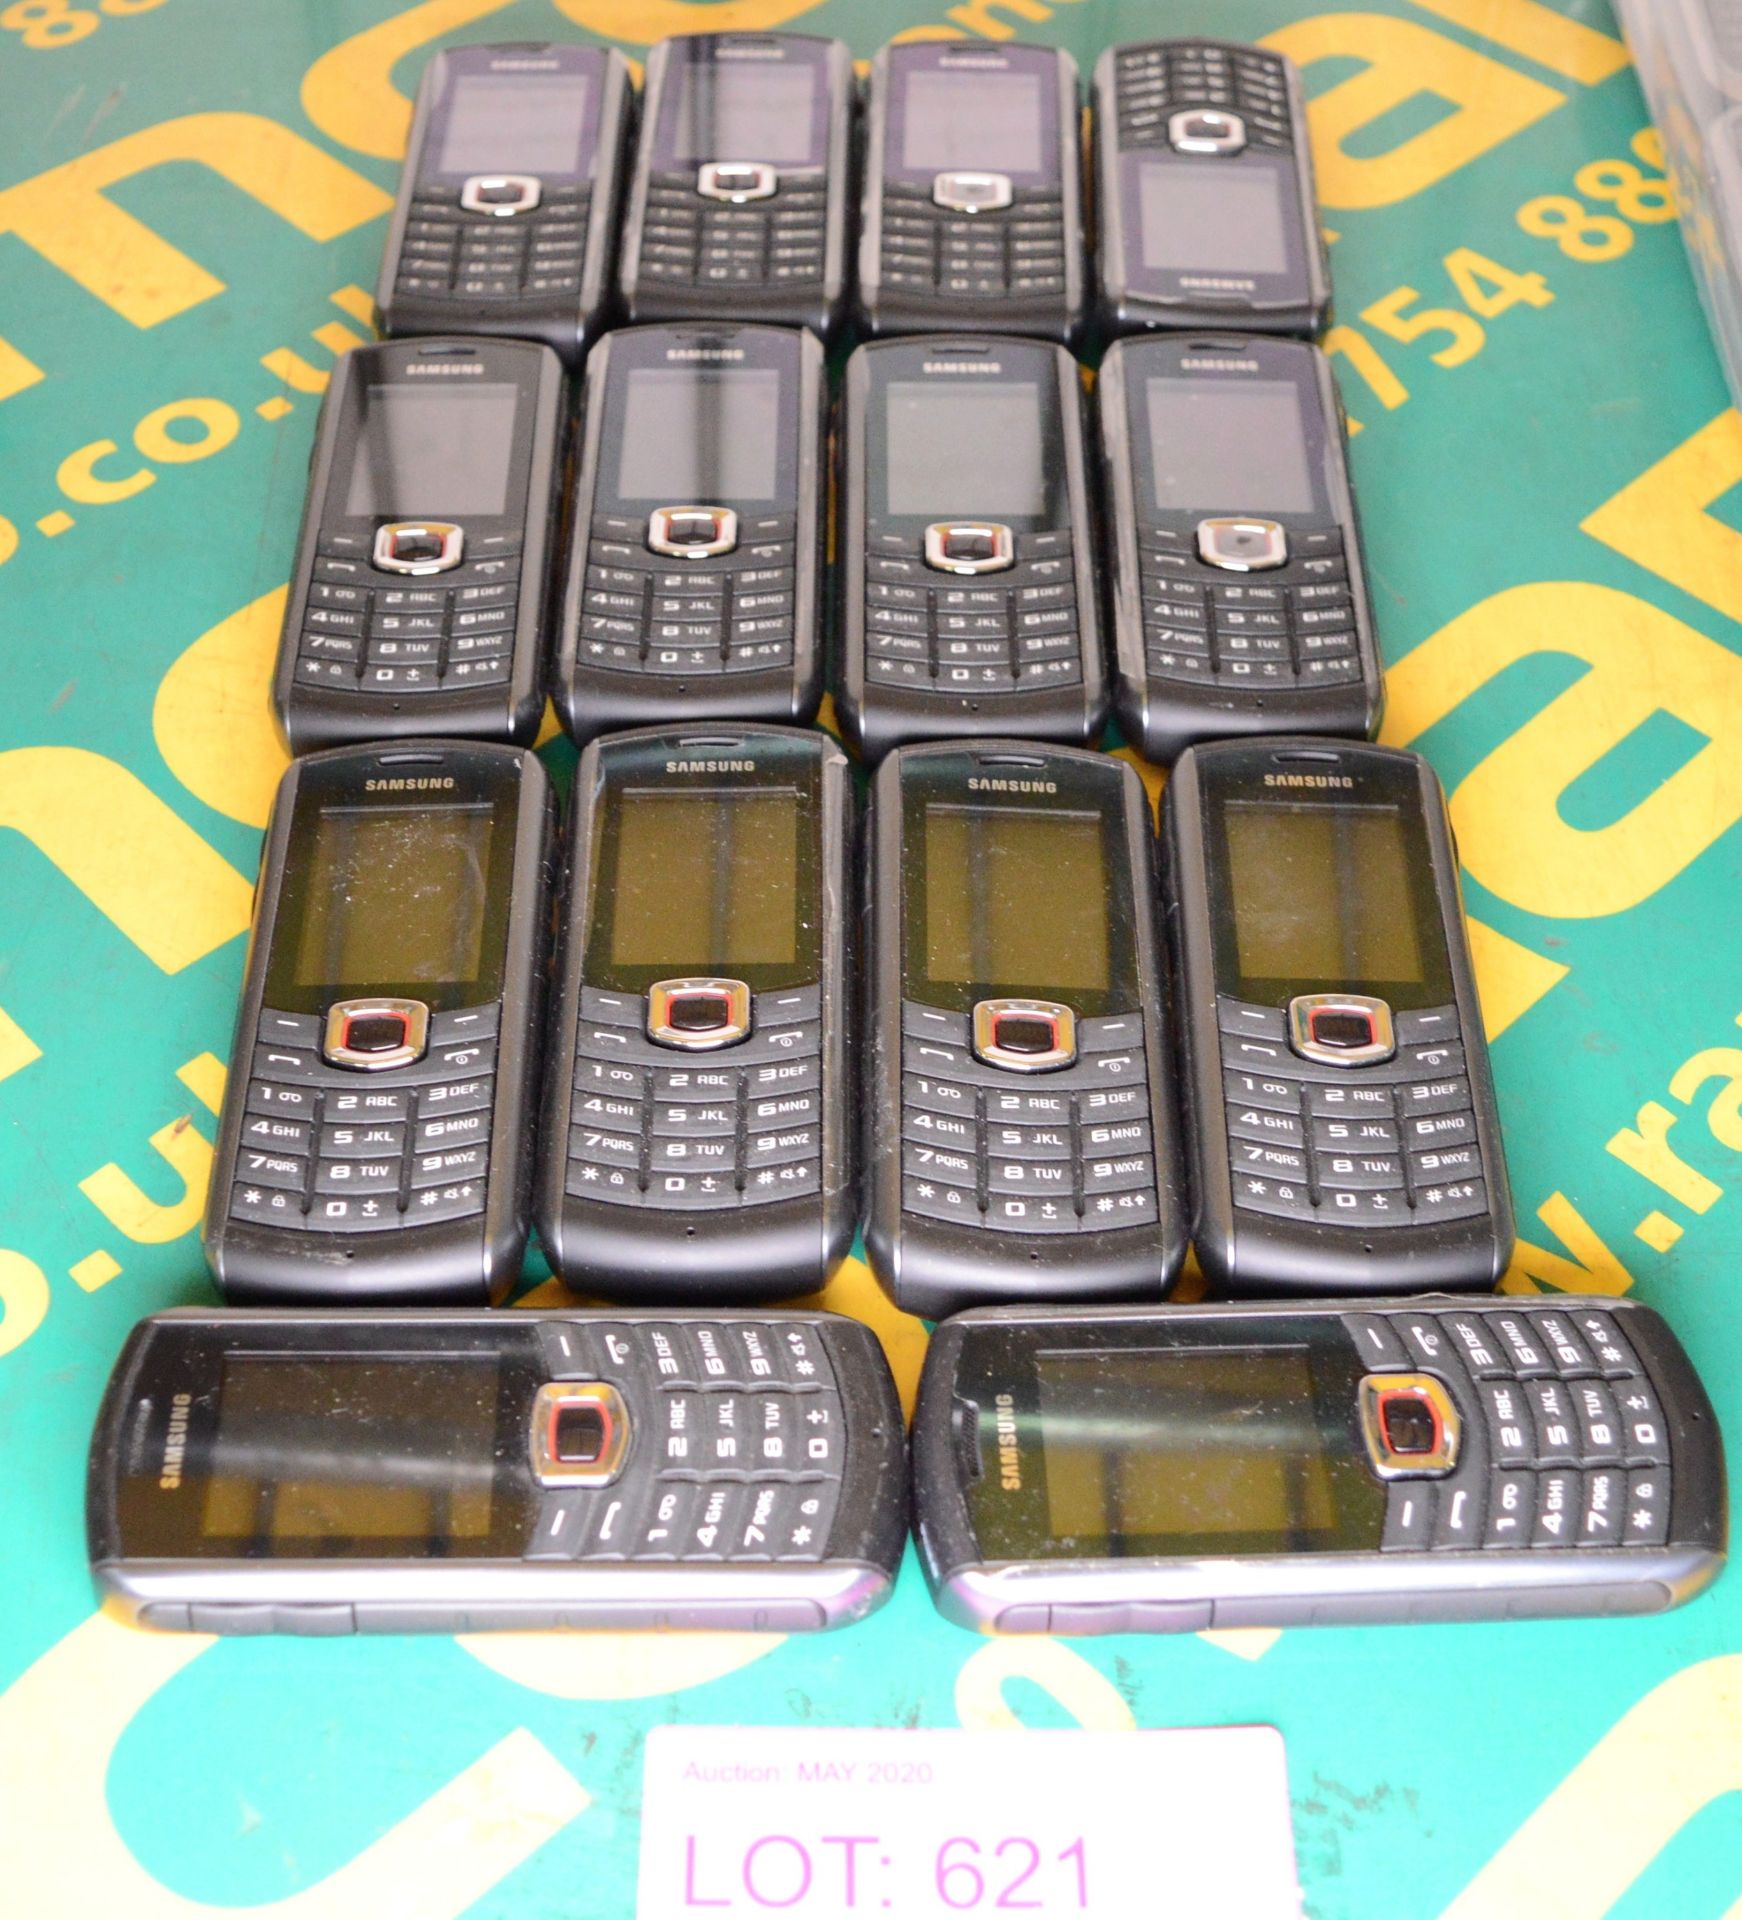 14x Samsung Mobile Phones - Batteries may be missing.